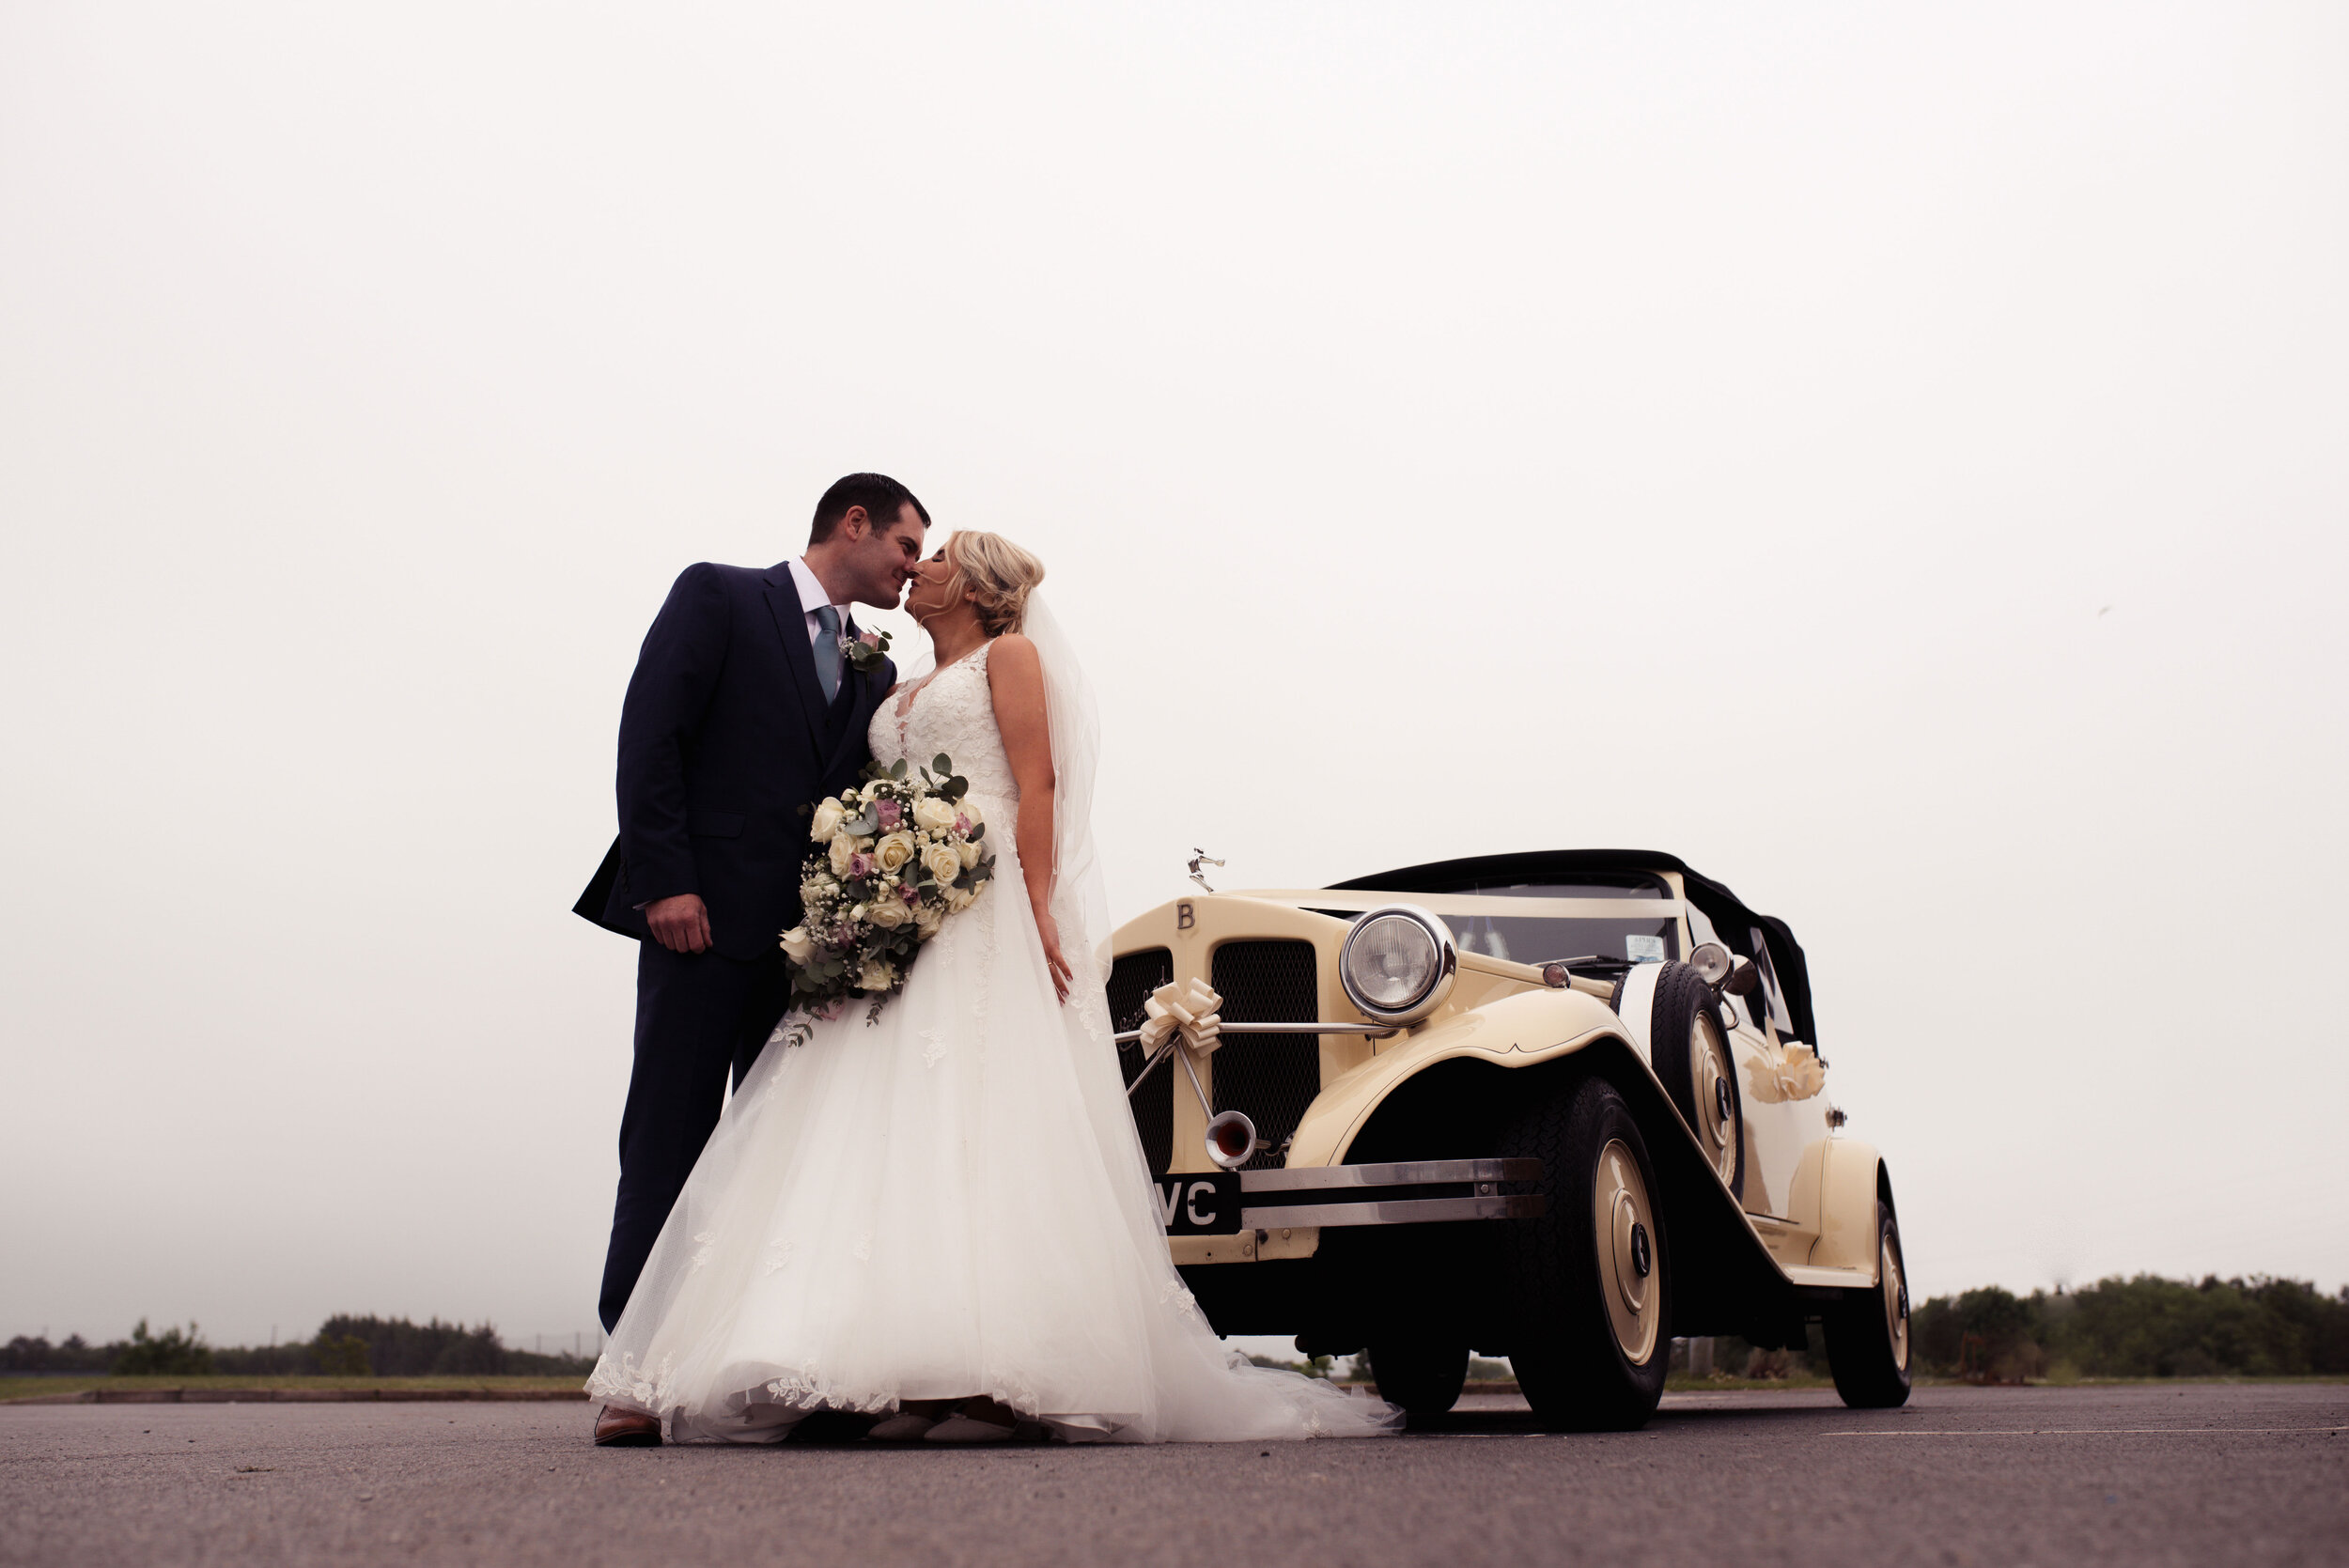 The bride and groom stand outside their wedding car at whitehaven golf club